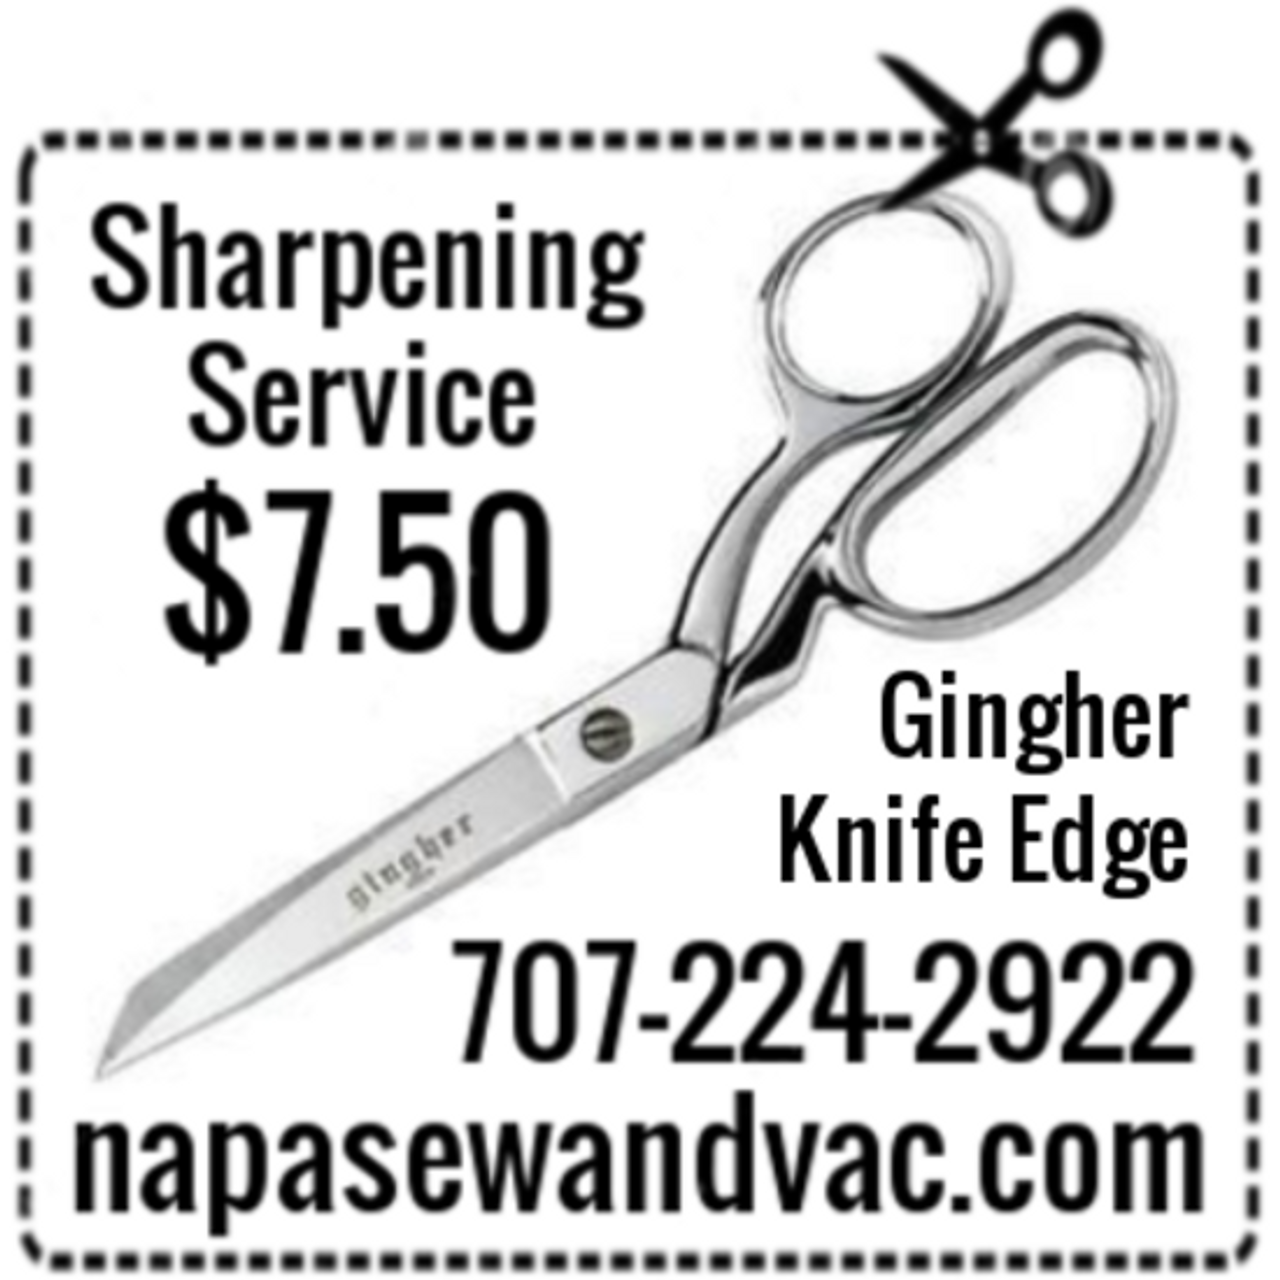 https://cdn11.bigcommerce.com/s-mjonc/images/stencil/1280x1280/products/943/2460/SHARPENING_COUPON_GINGHER_KNIFE_EDGE_7.50__36905.1536446105.PNG?c=2